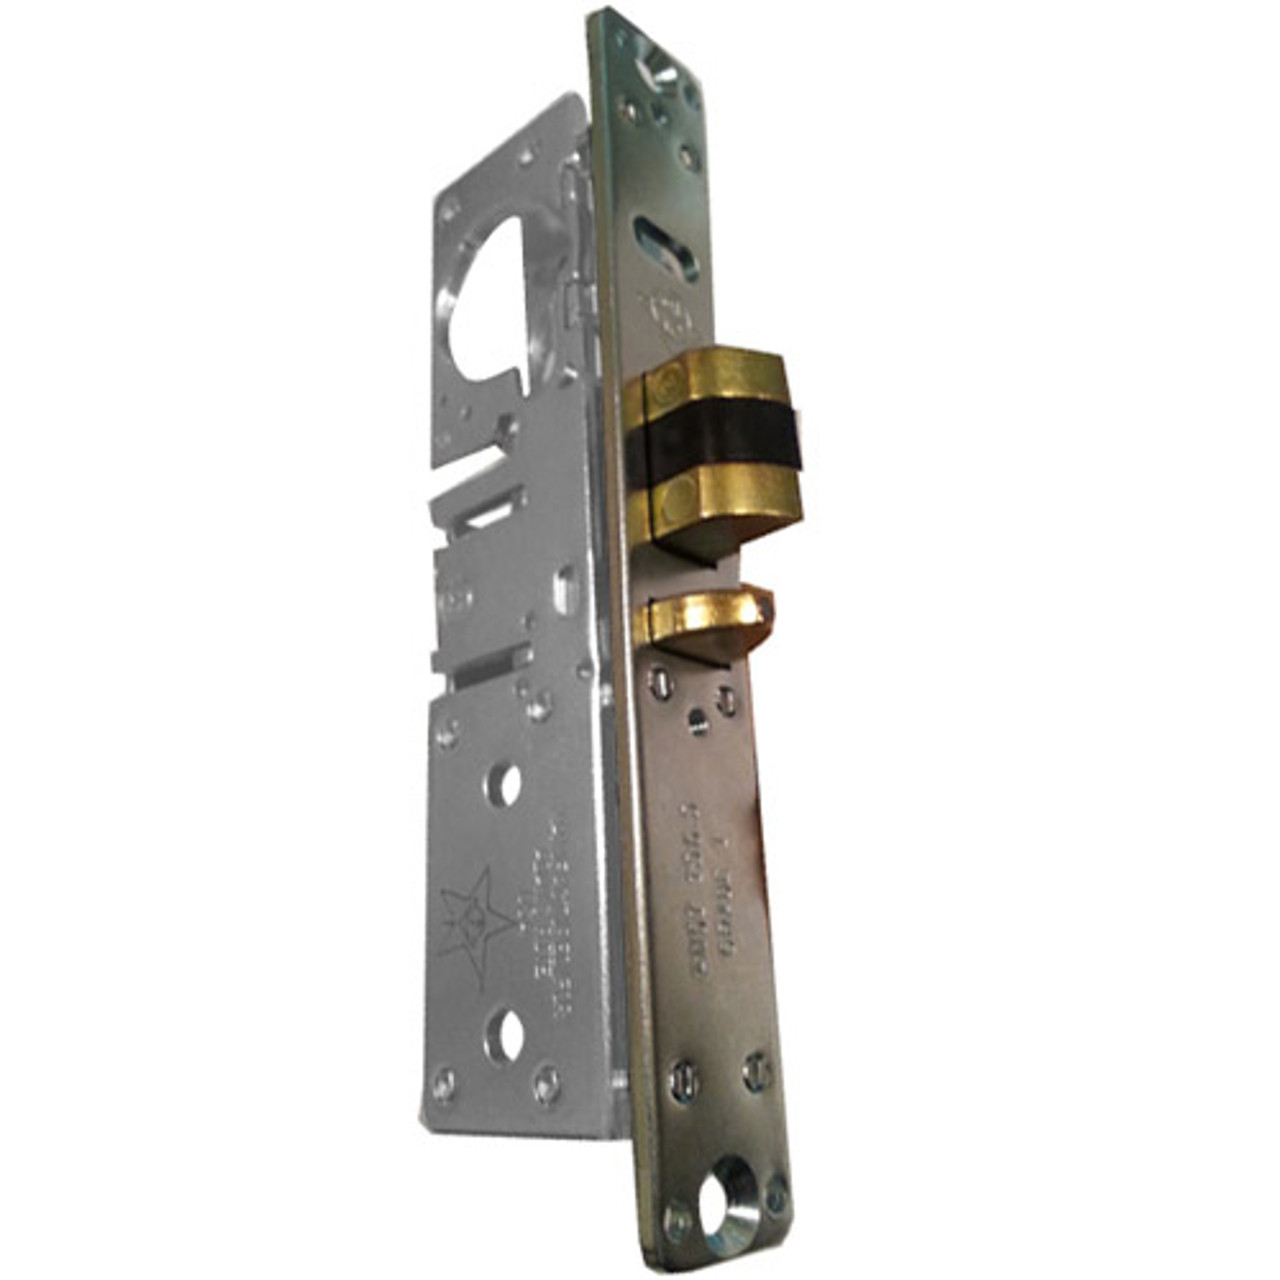 4512-35-101-628 Adams Rite Standard Deadlatch with Bevel Faceplate in Clear Anodized Finish